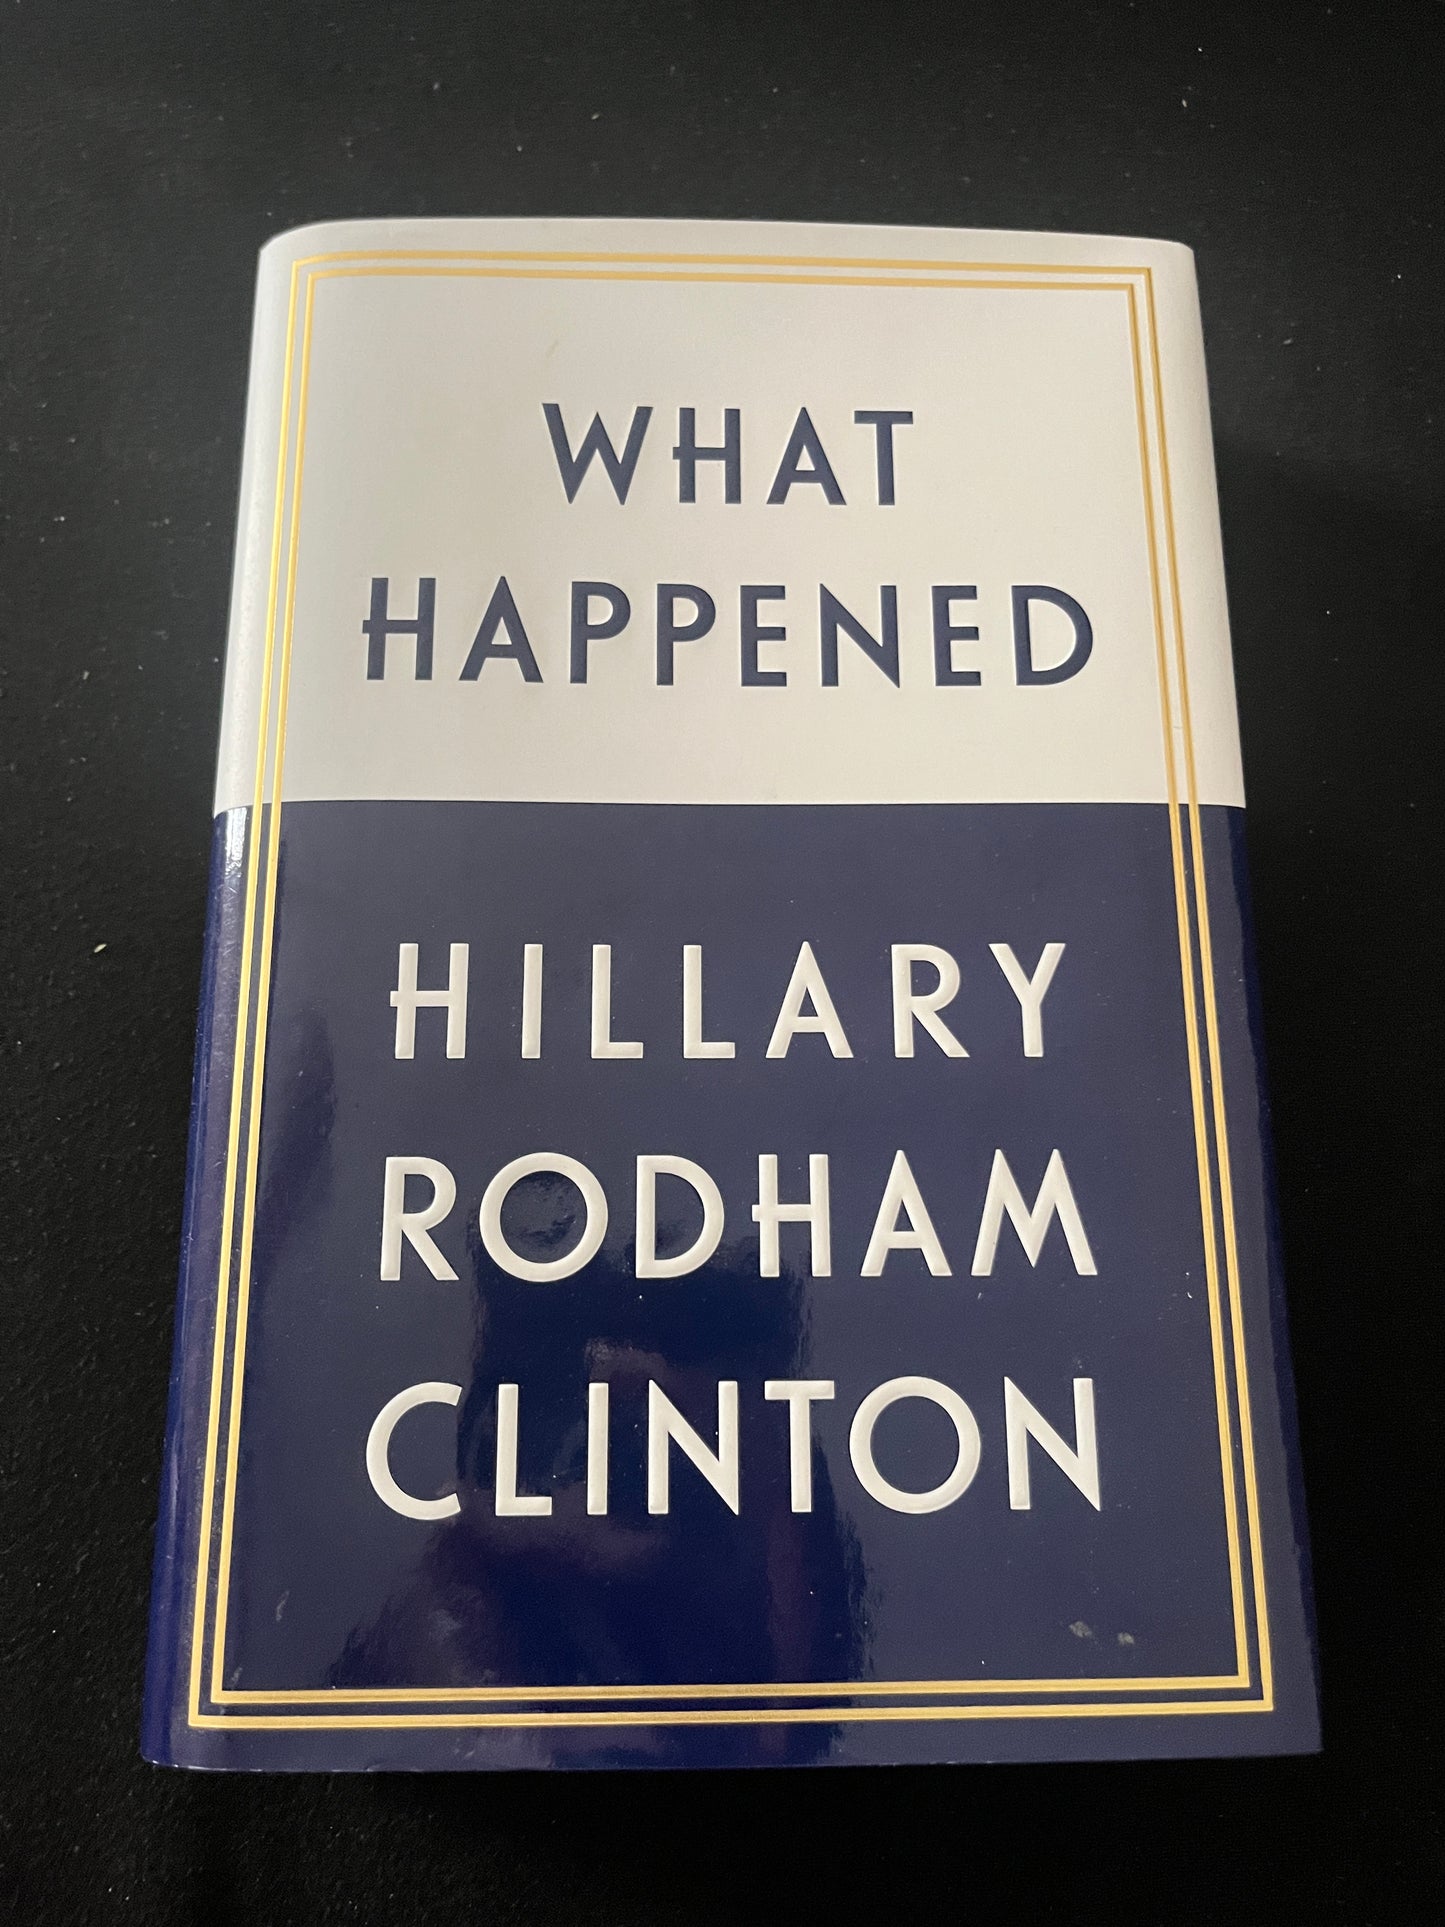 WHAT HAPPENED by Hillary Rodham Clinton